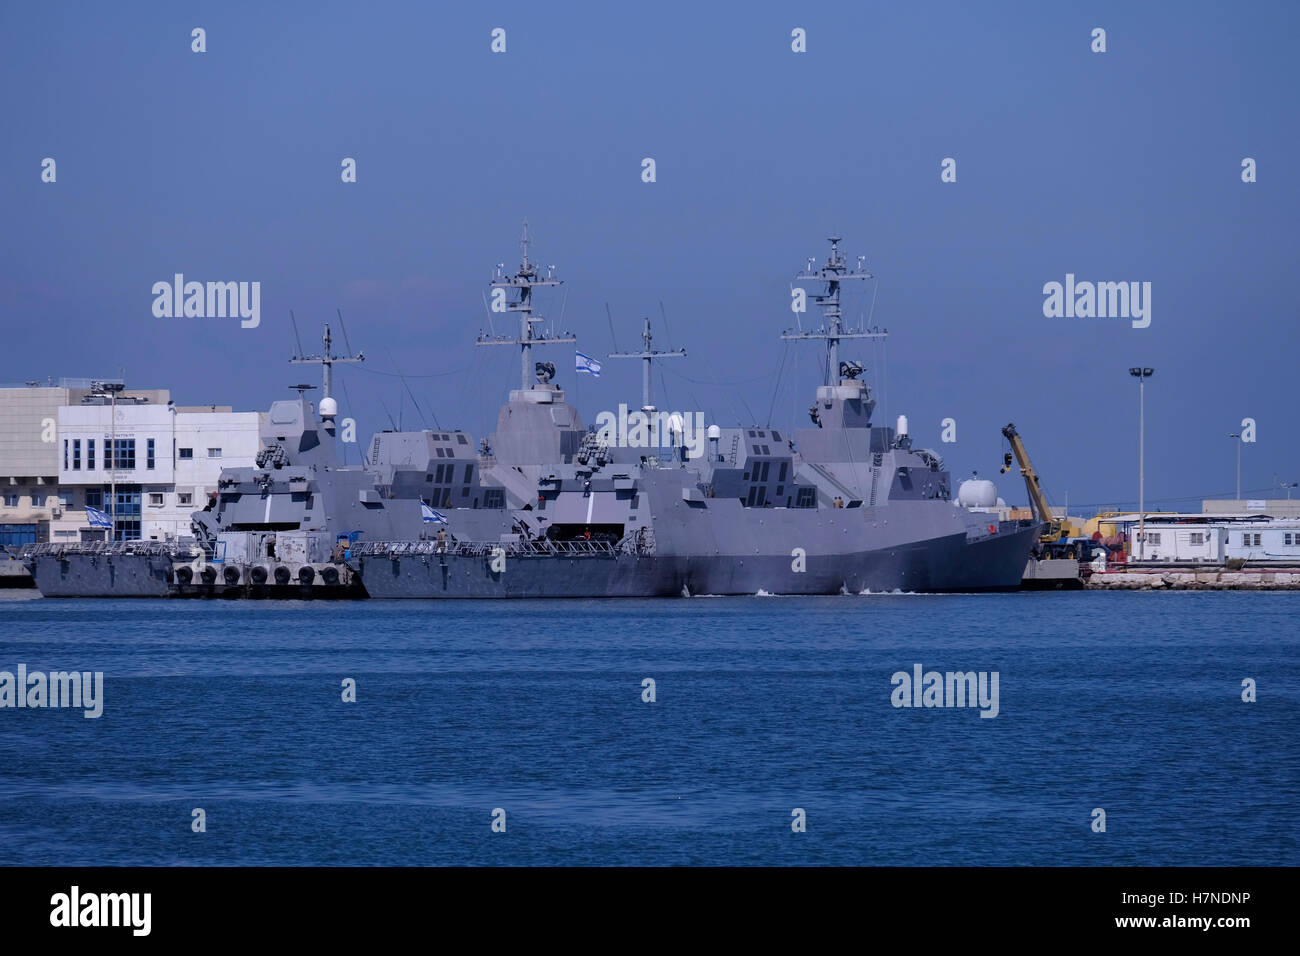 Sa'ar 5 class missile сorvettes of the IDF Israeli Navy anchored at the Port of Haifa Israel's largest seaport. Israel Stock Photo